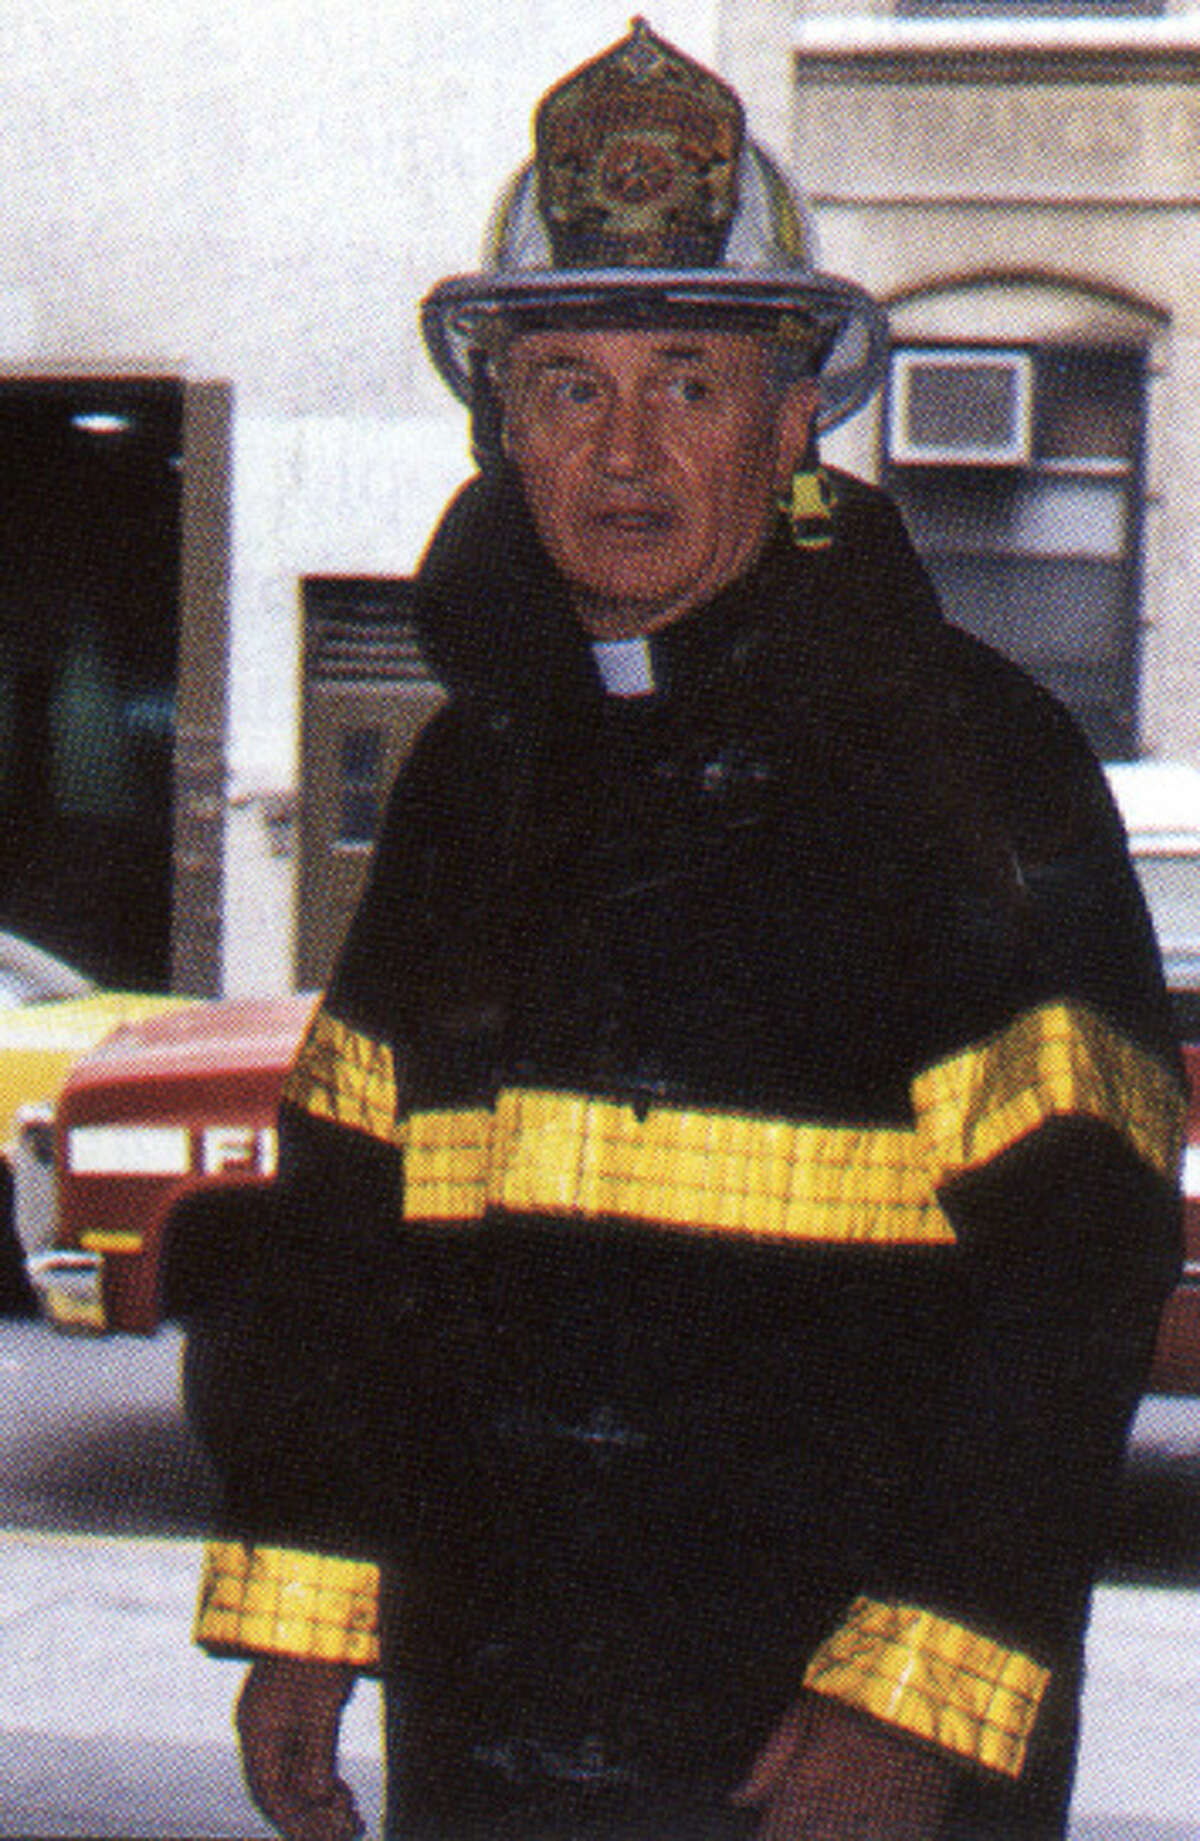 The Rev. Mychal Judge, a chaplain with the New York City Fire Department, died in the Sept. 11, 2001 collapse of the World Trade Center in New York City. 